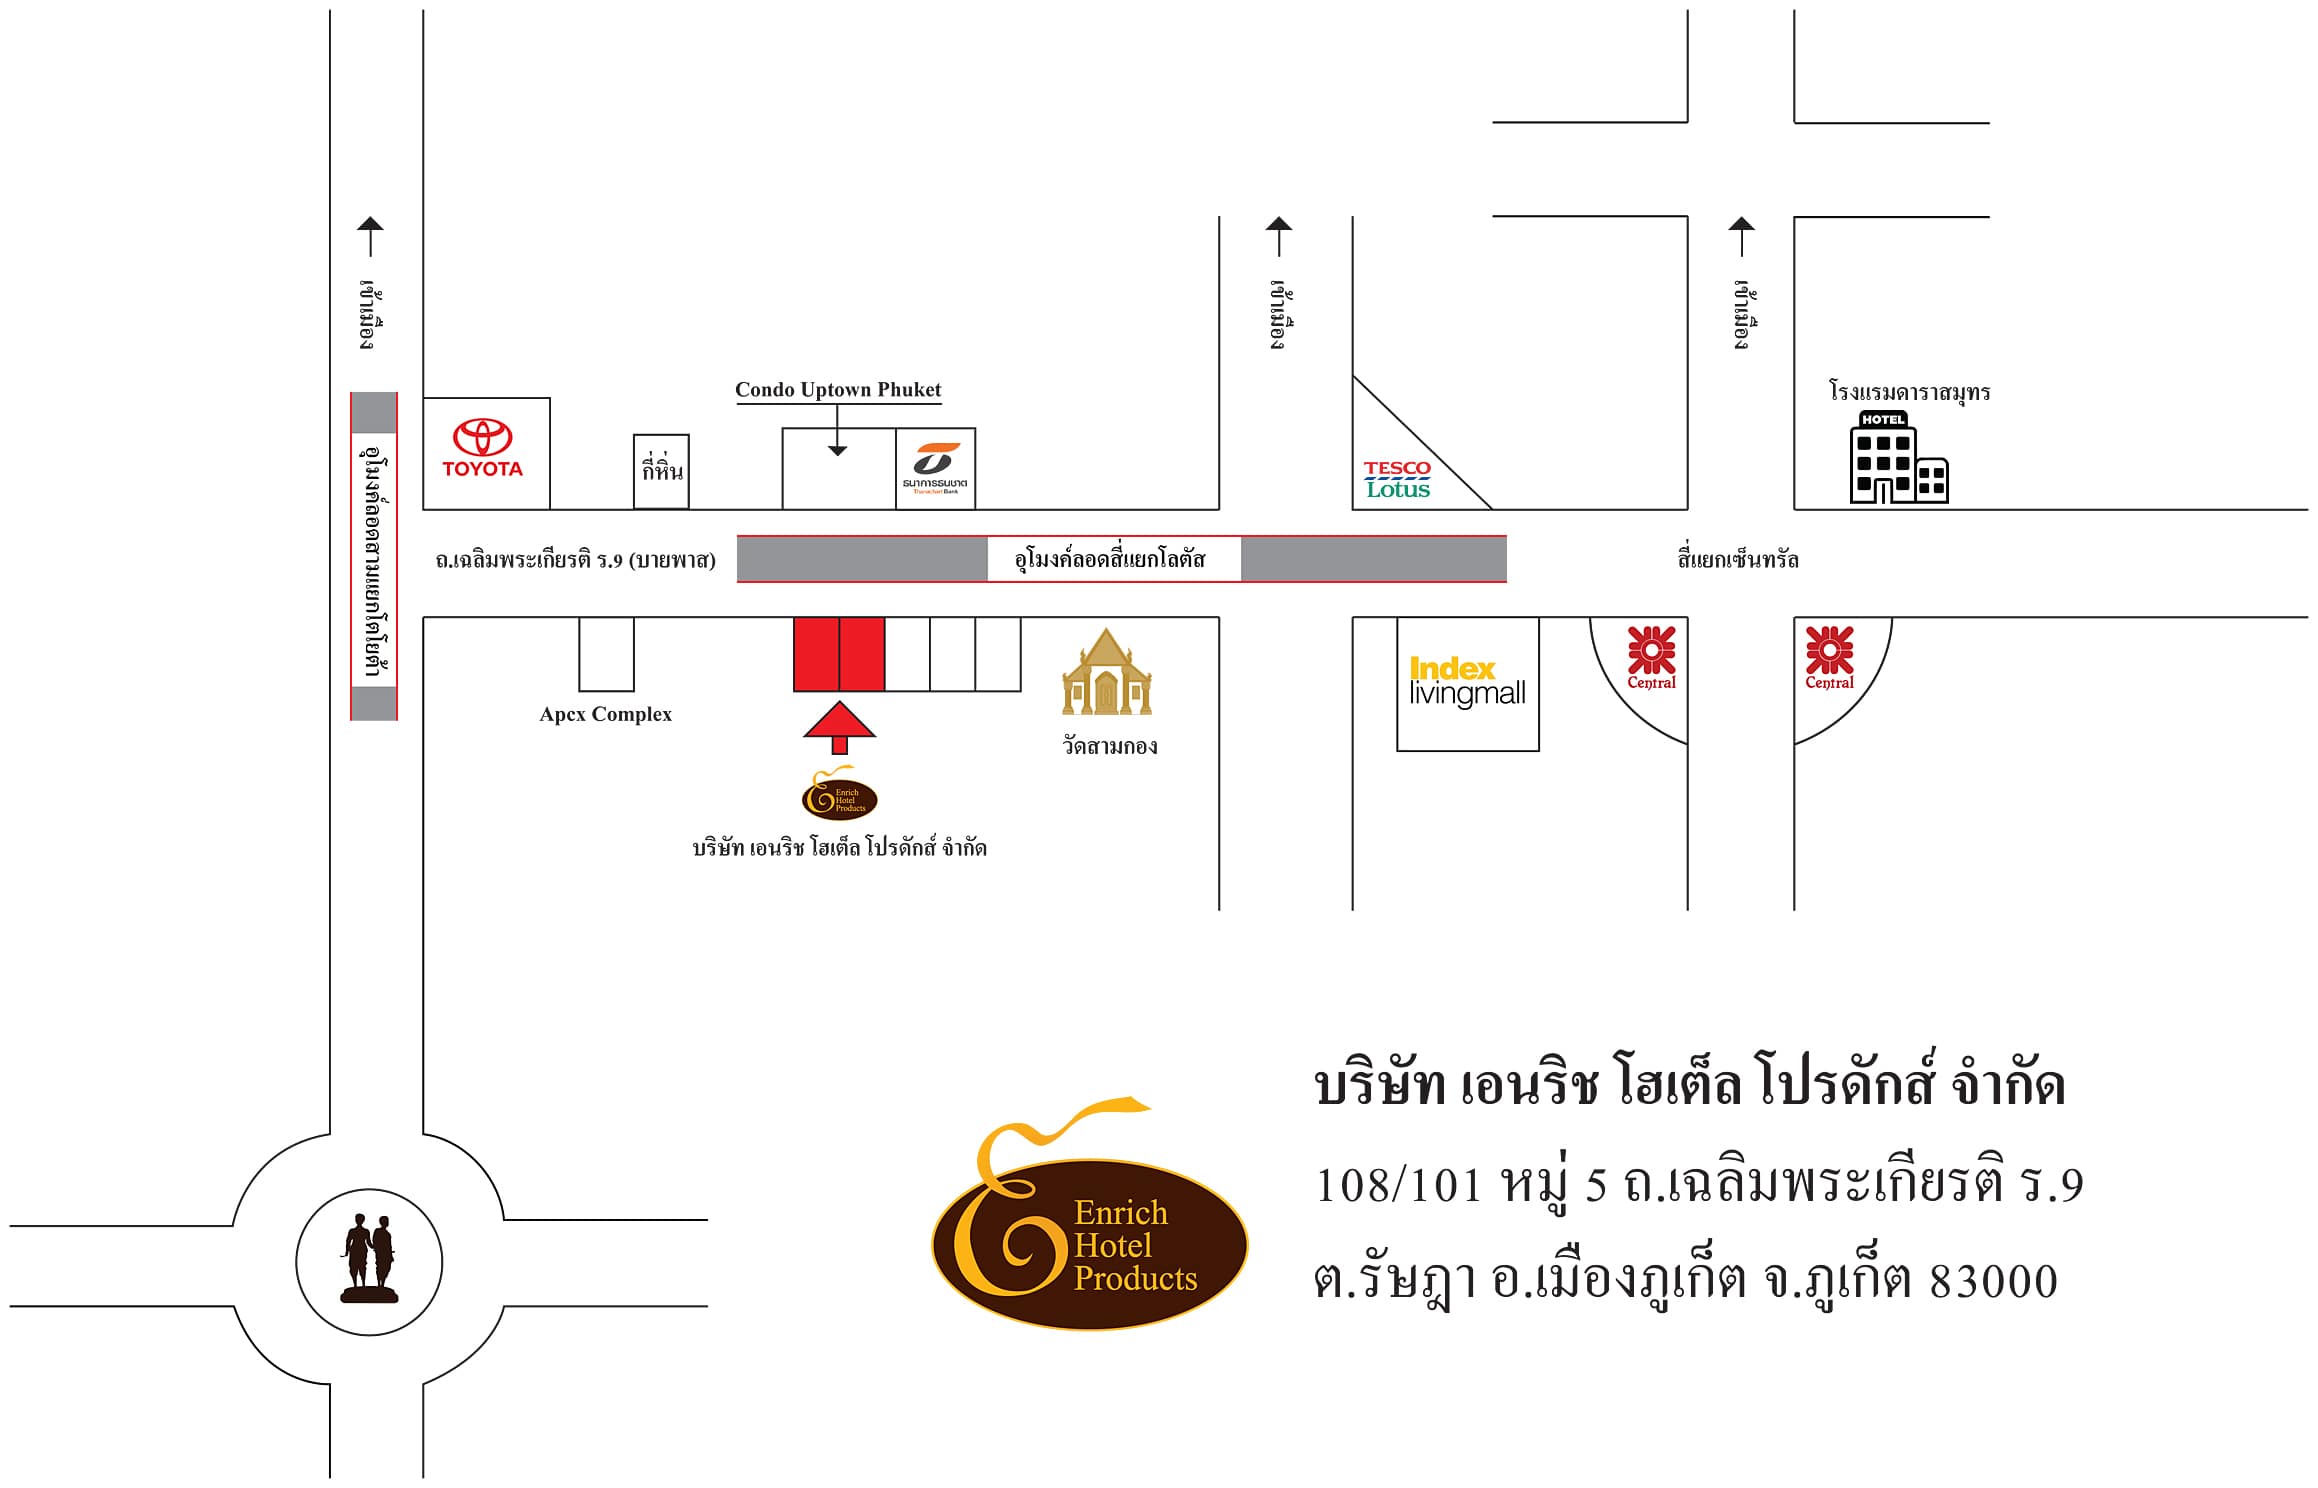 Enrich Hotel Products Map